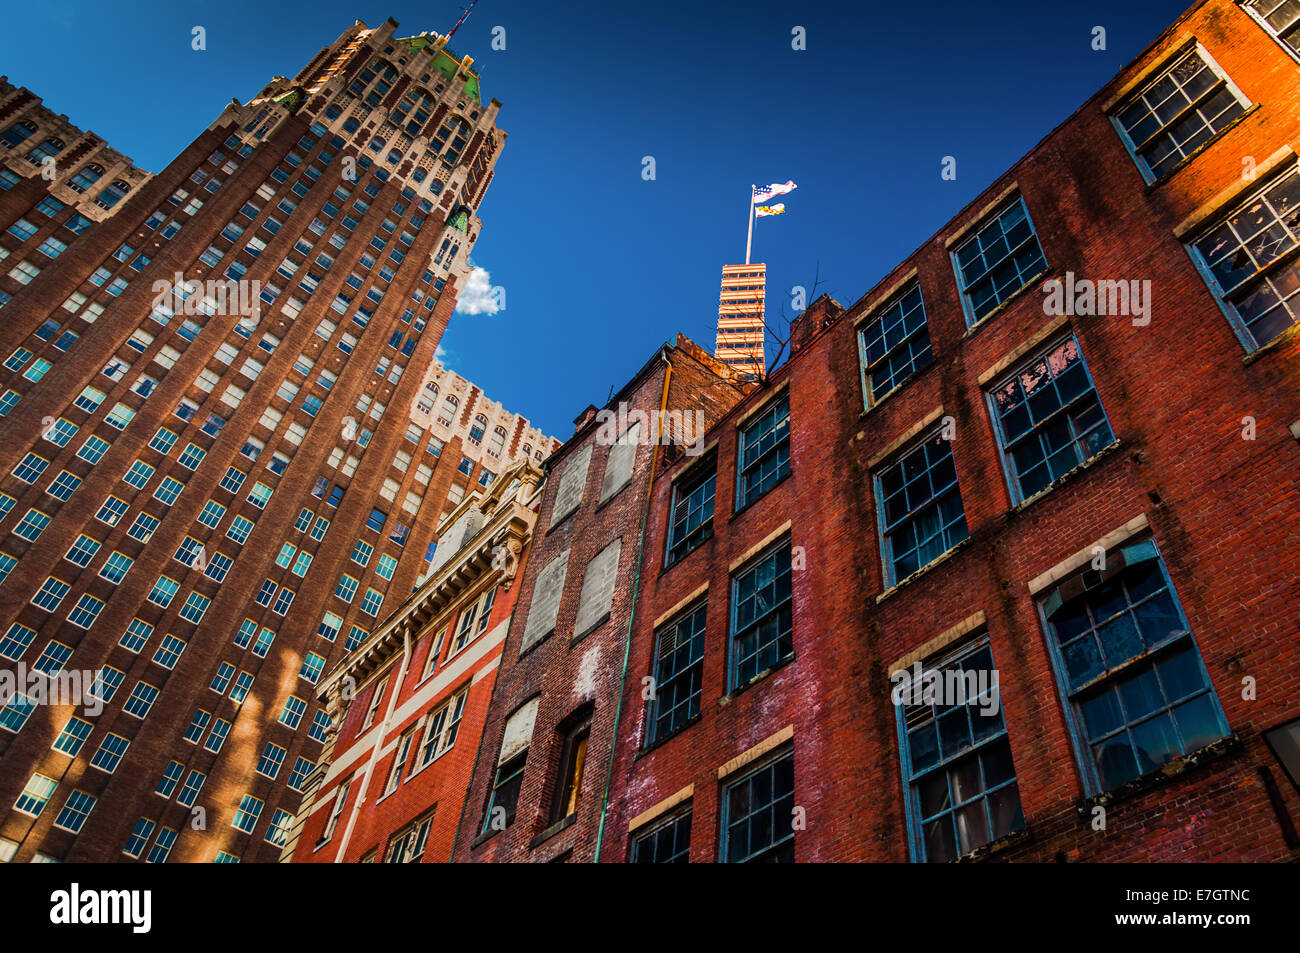 Abandoned brick building and highrise in Baltimore, Maryland. Stock Photo